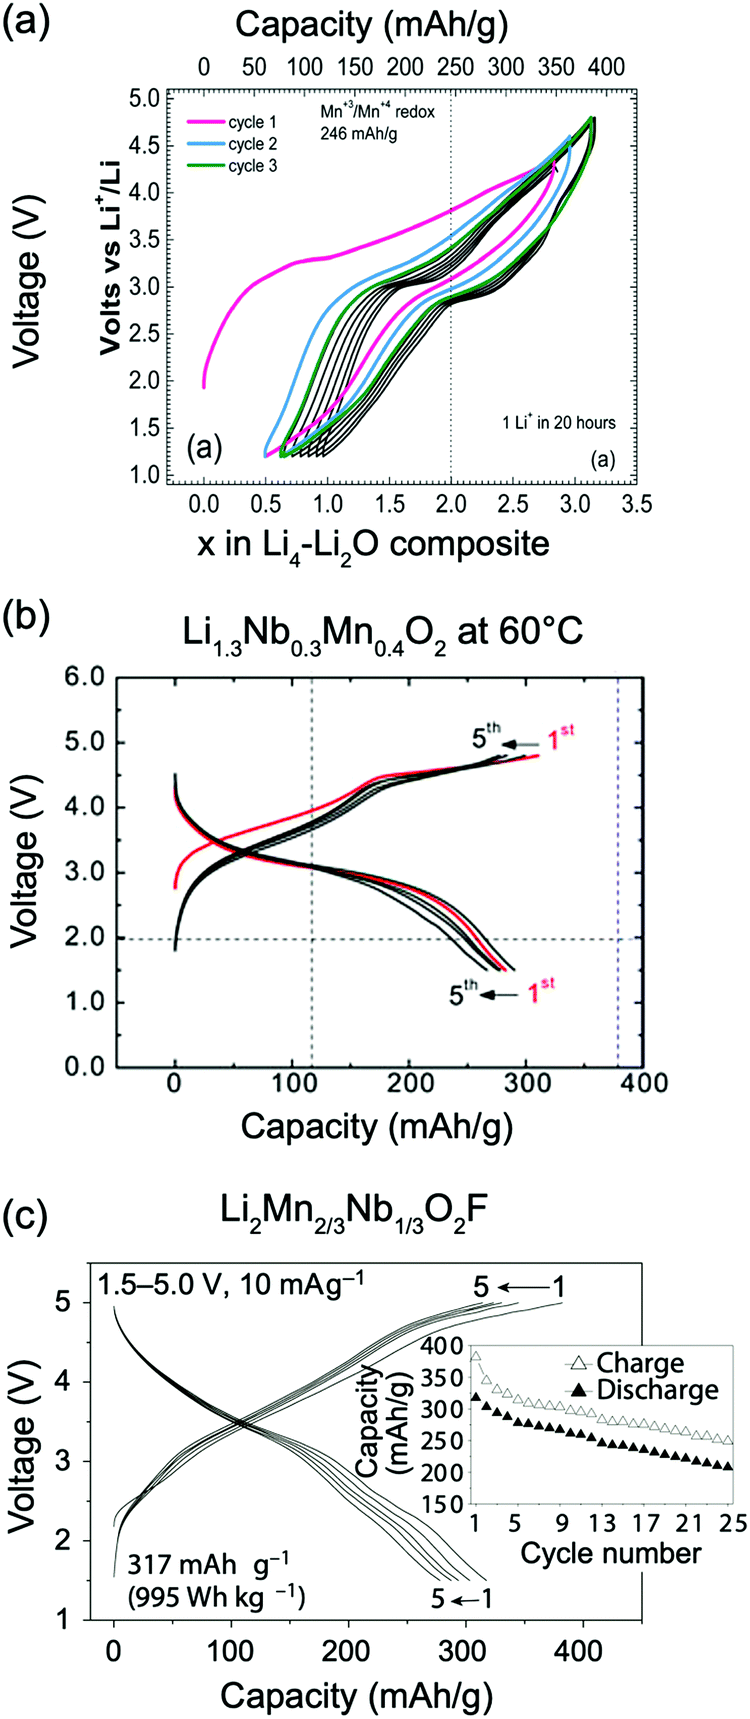 Cation Disordered Rocksalt Transition Metal Oxides And Oxyfluorides For High Energy Lithium Ion Cathodes Energy Environmental Science Rsc Publishing Doi 10 1039 C9eej